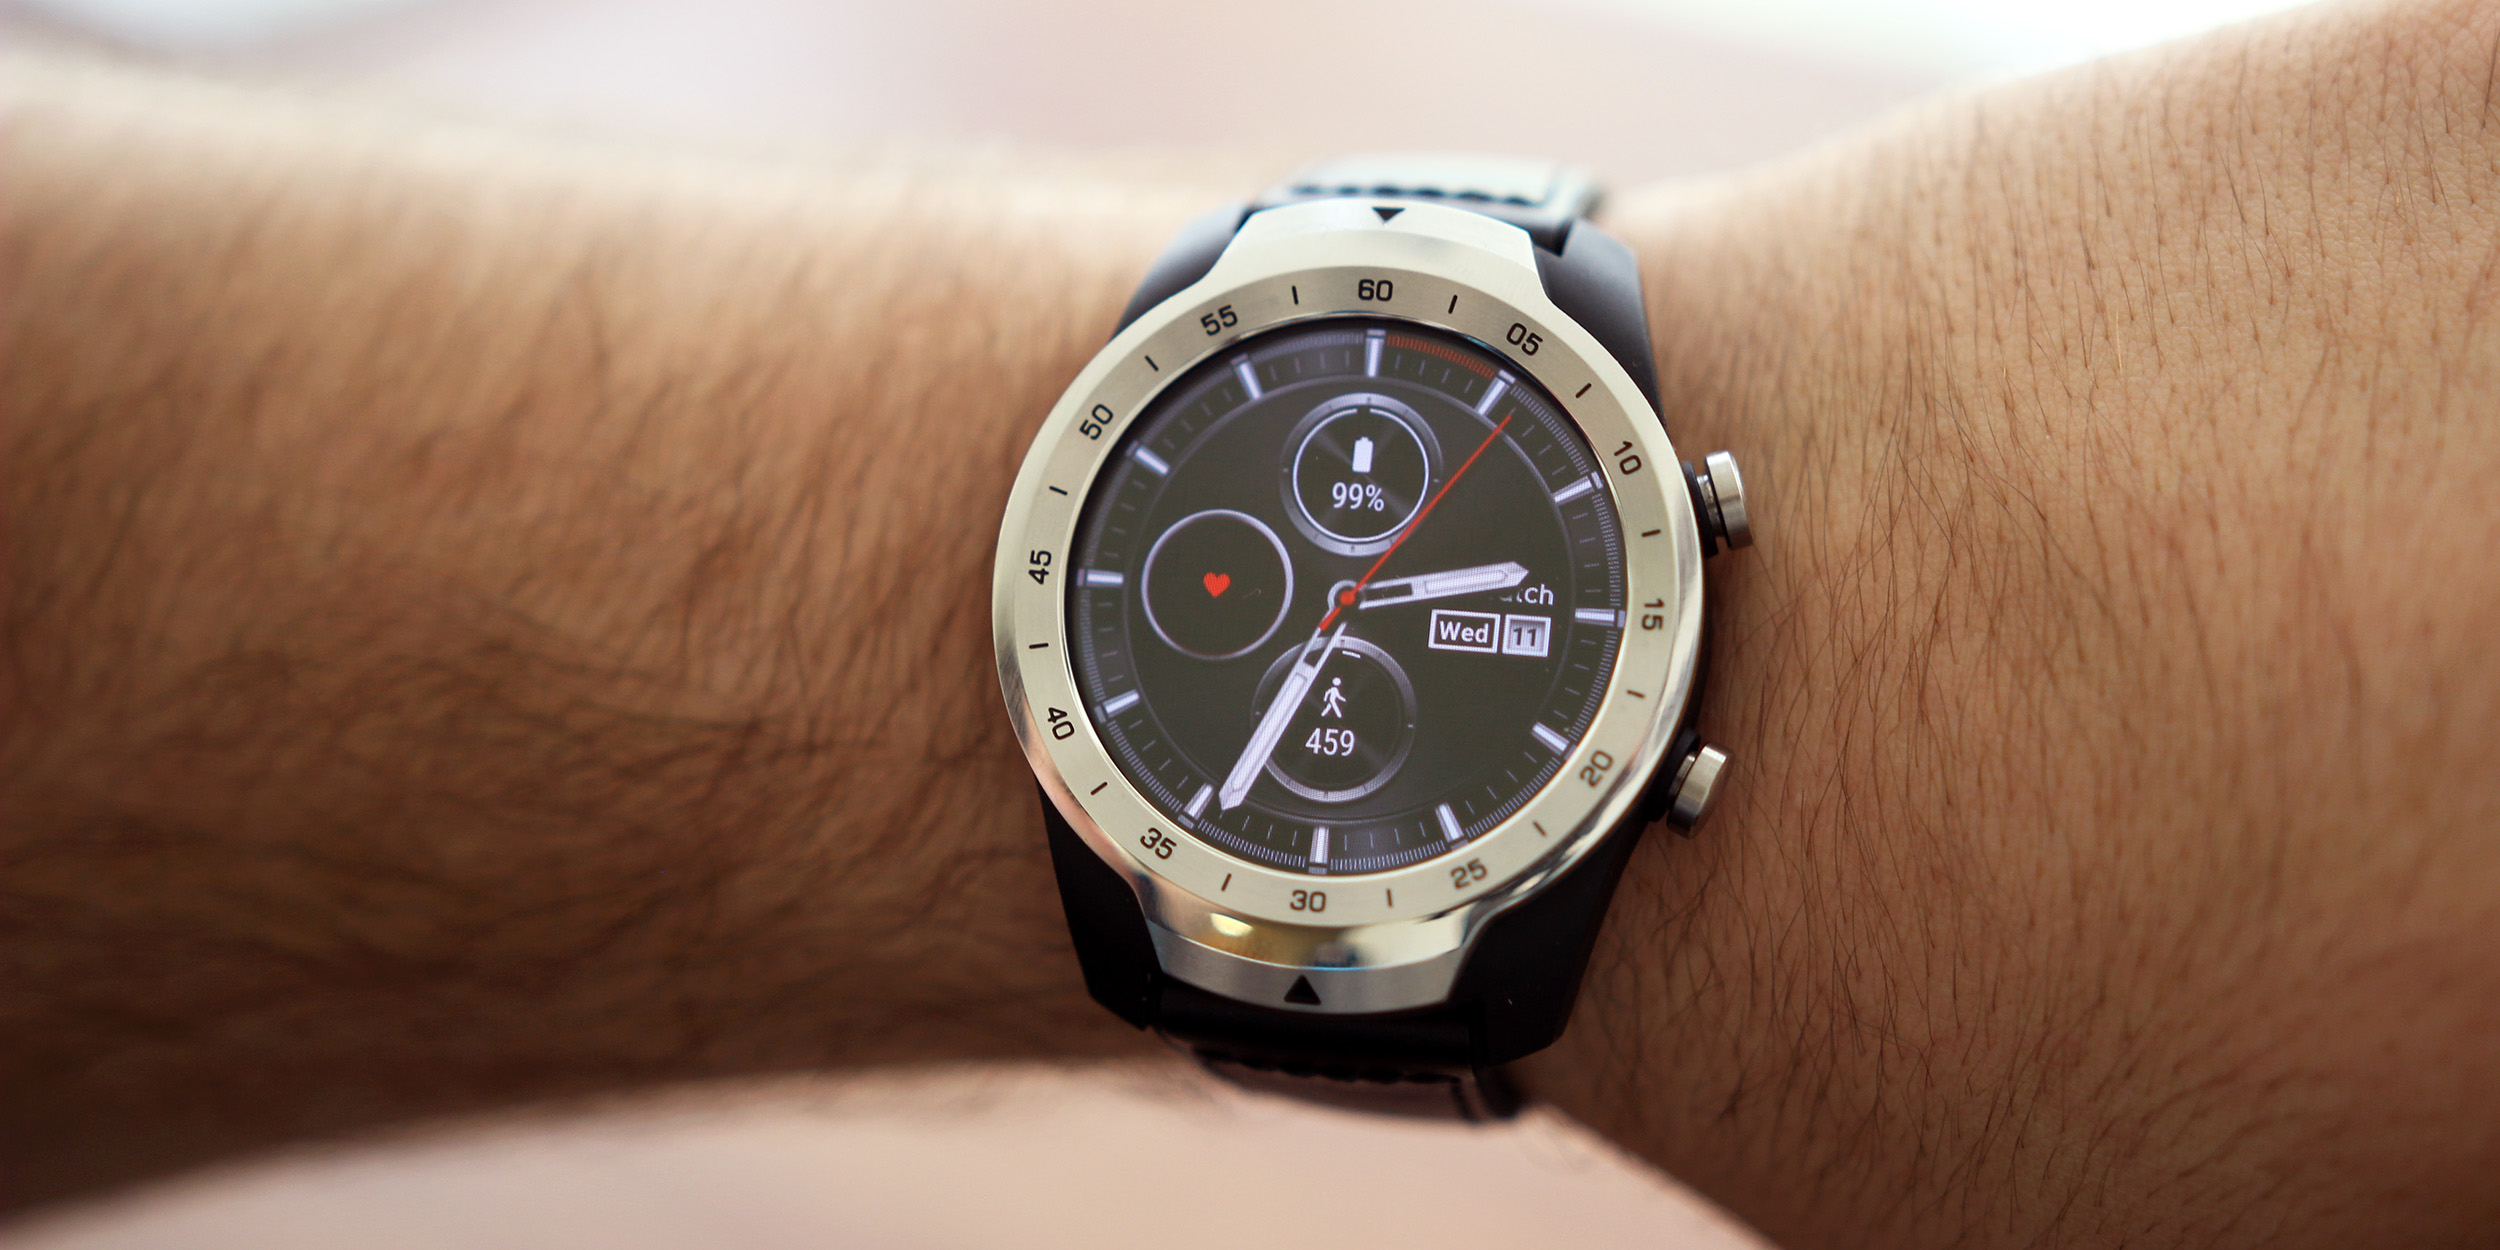 smartwatch android ticwatch